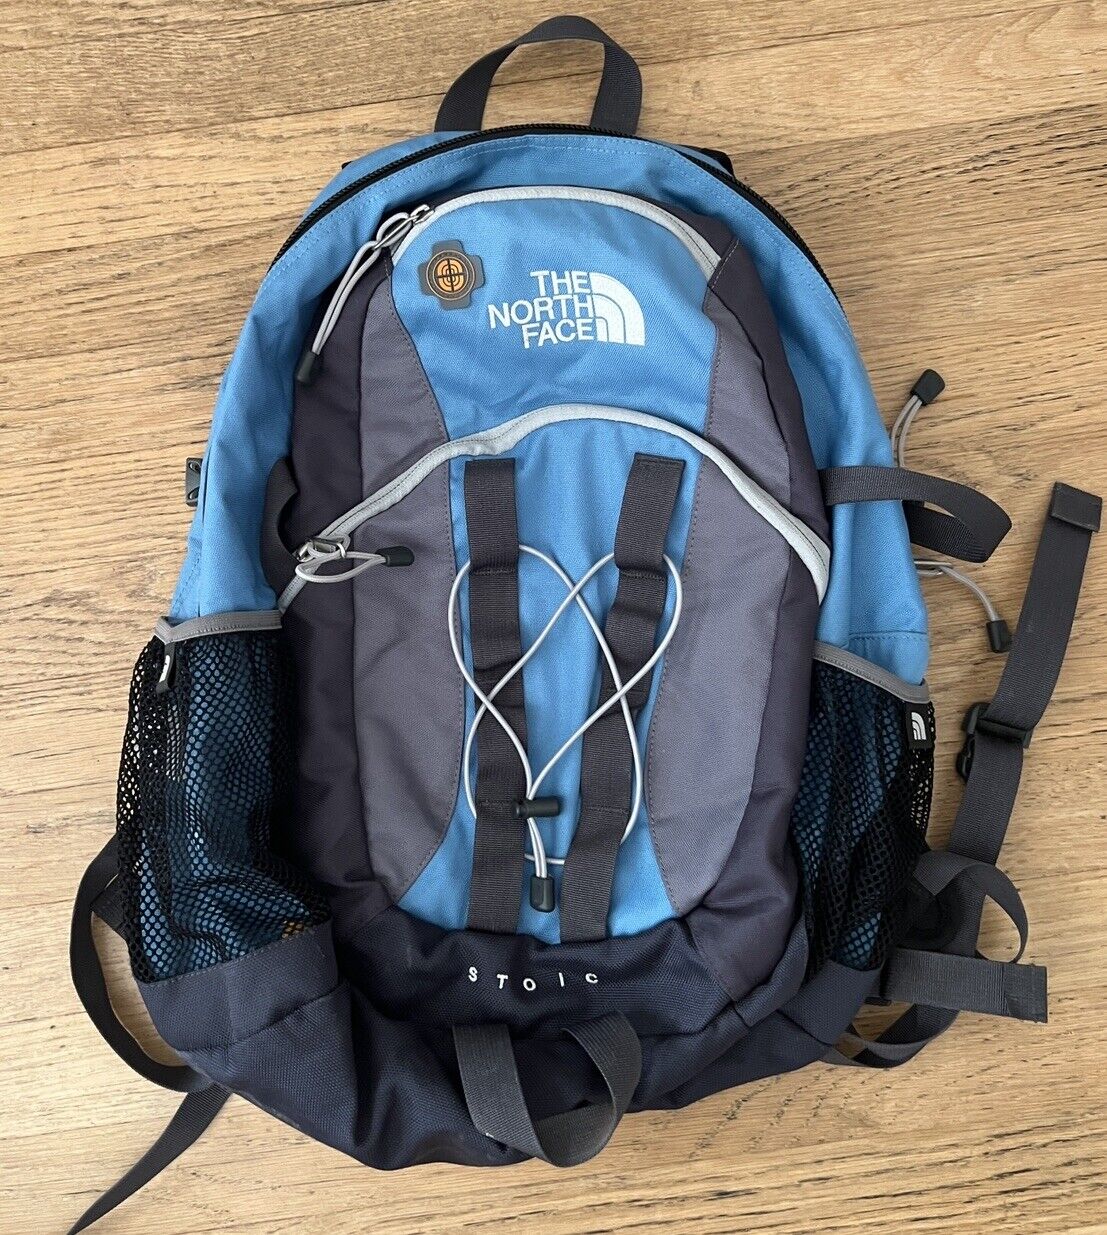 The North Face STOIC Backpack Laptop Book Bag Day Pack EUC